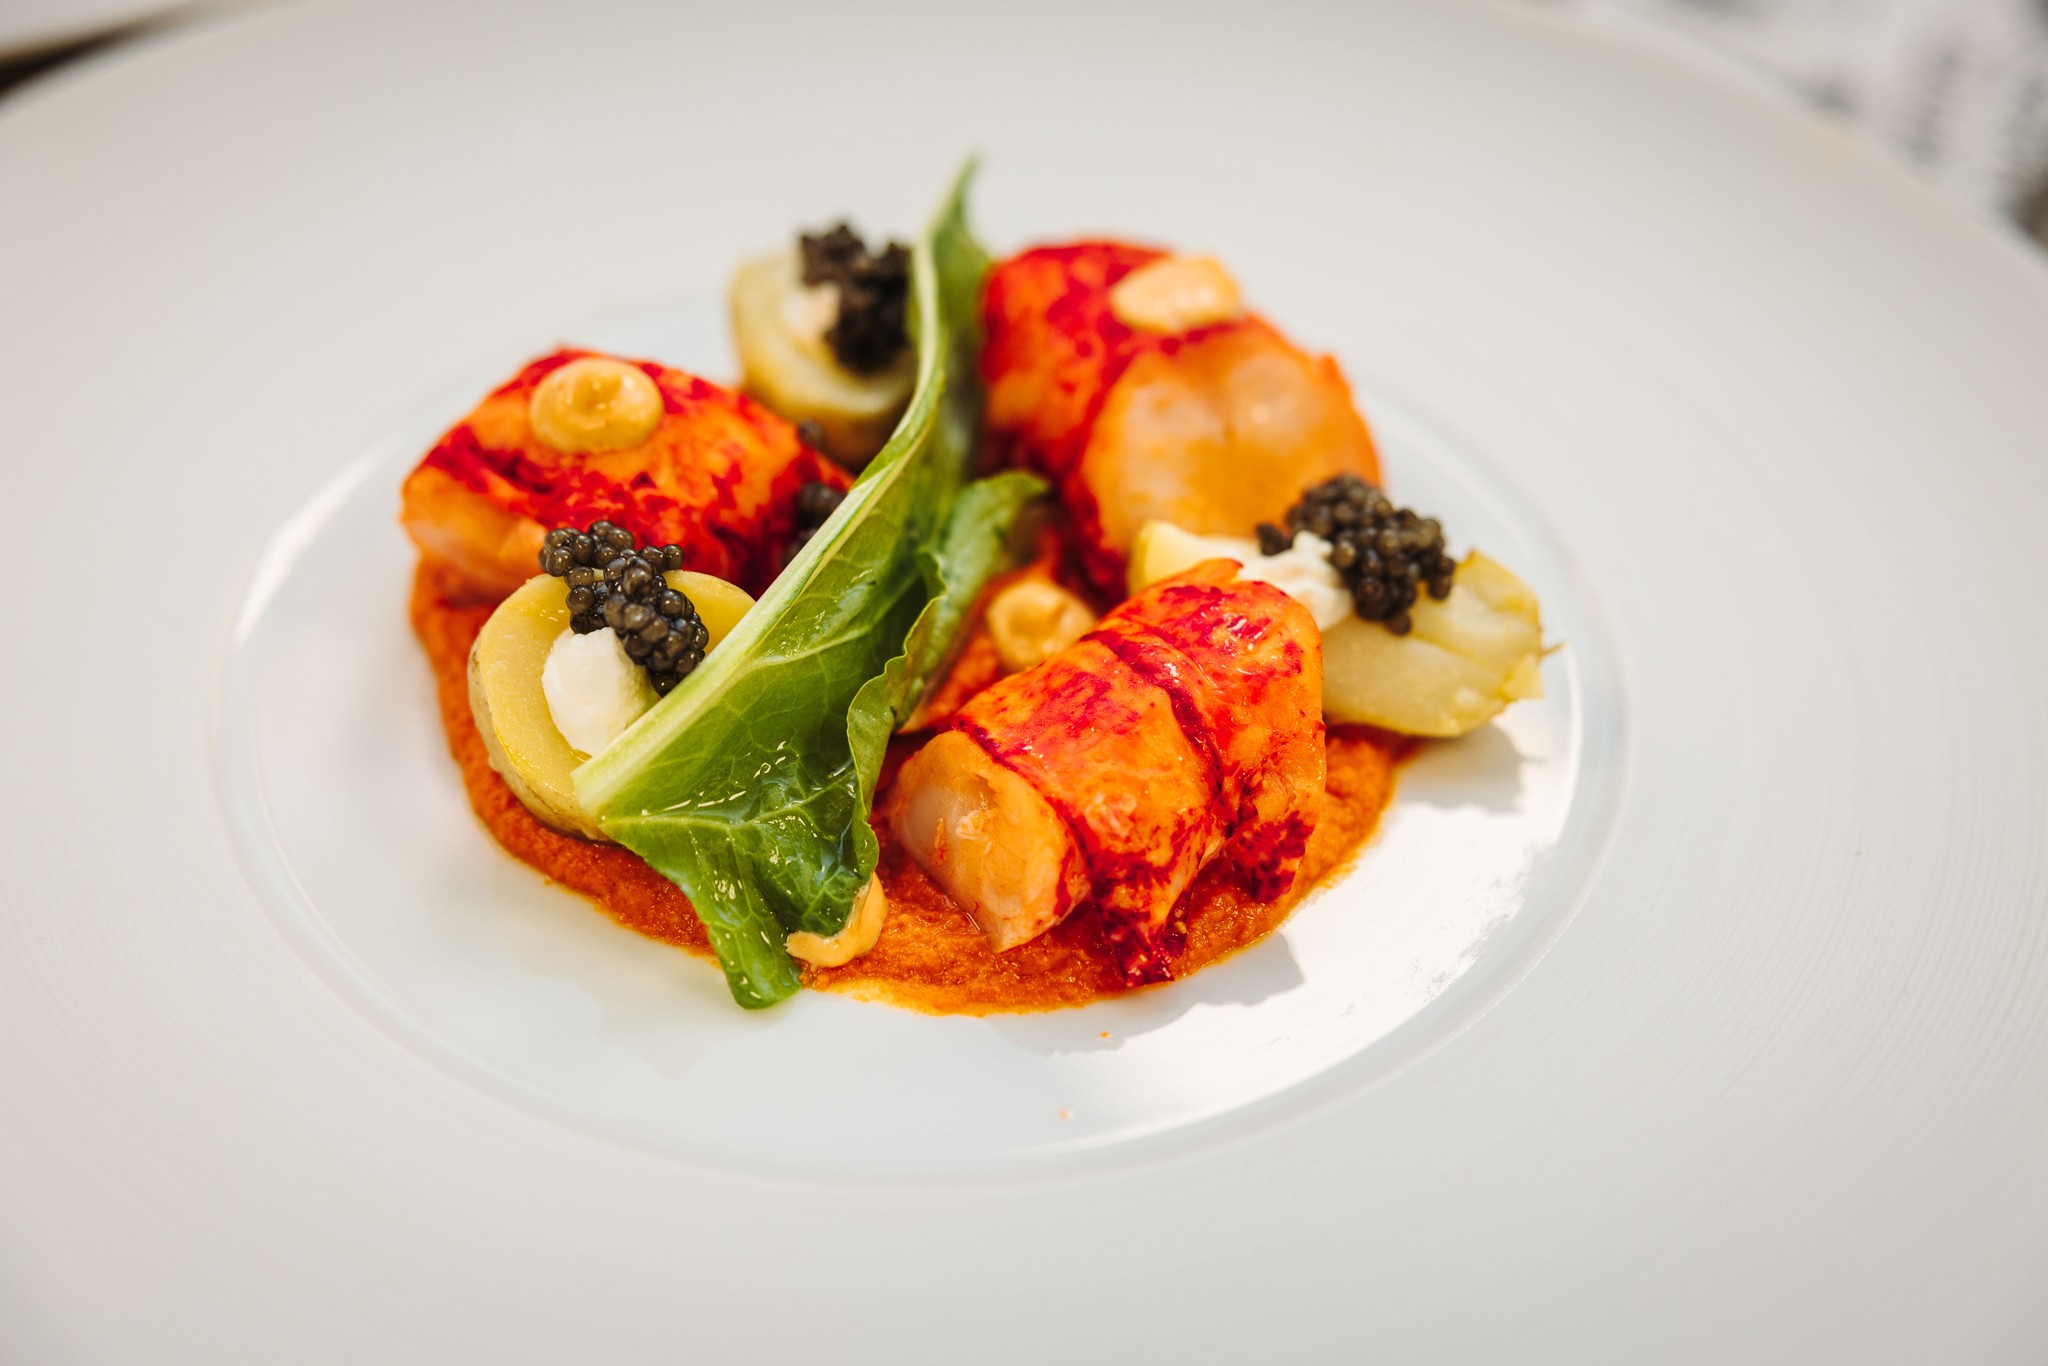 Lobster dish from Marcus Wareing at the Rosewater Pavilion at the 2023 Wimbledon Championships 